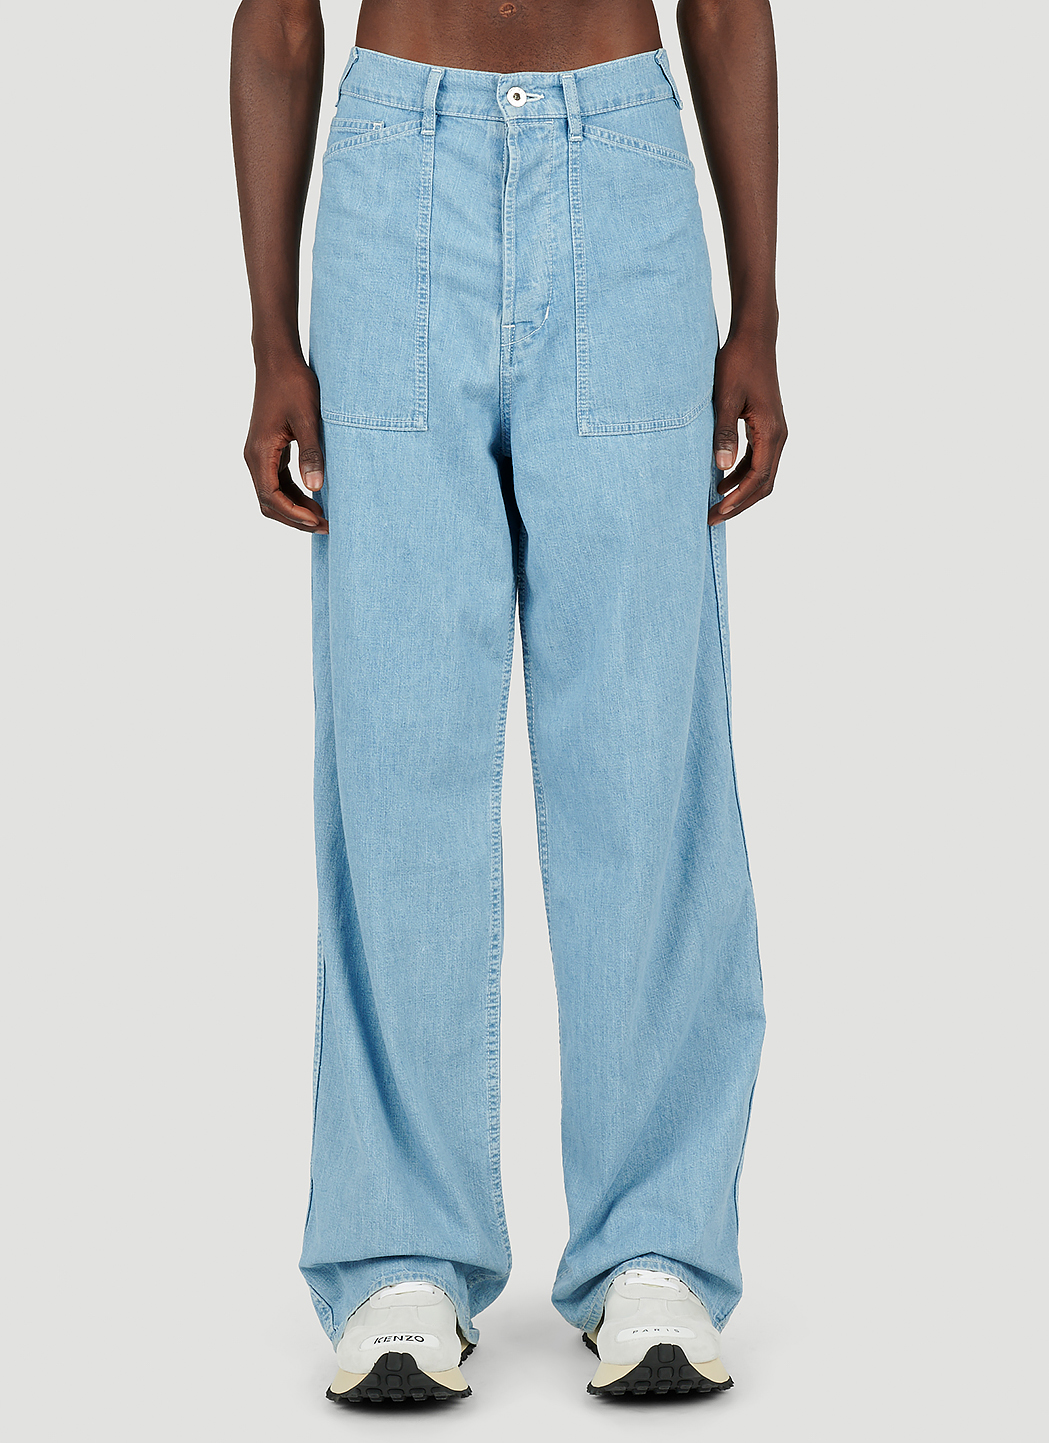 Rinse Sailor Jeans in Blue - Kenzo